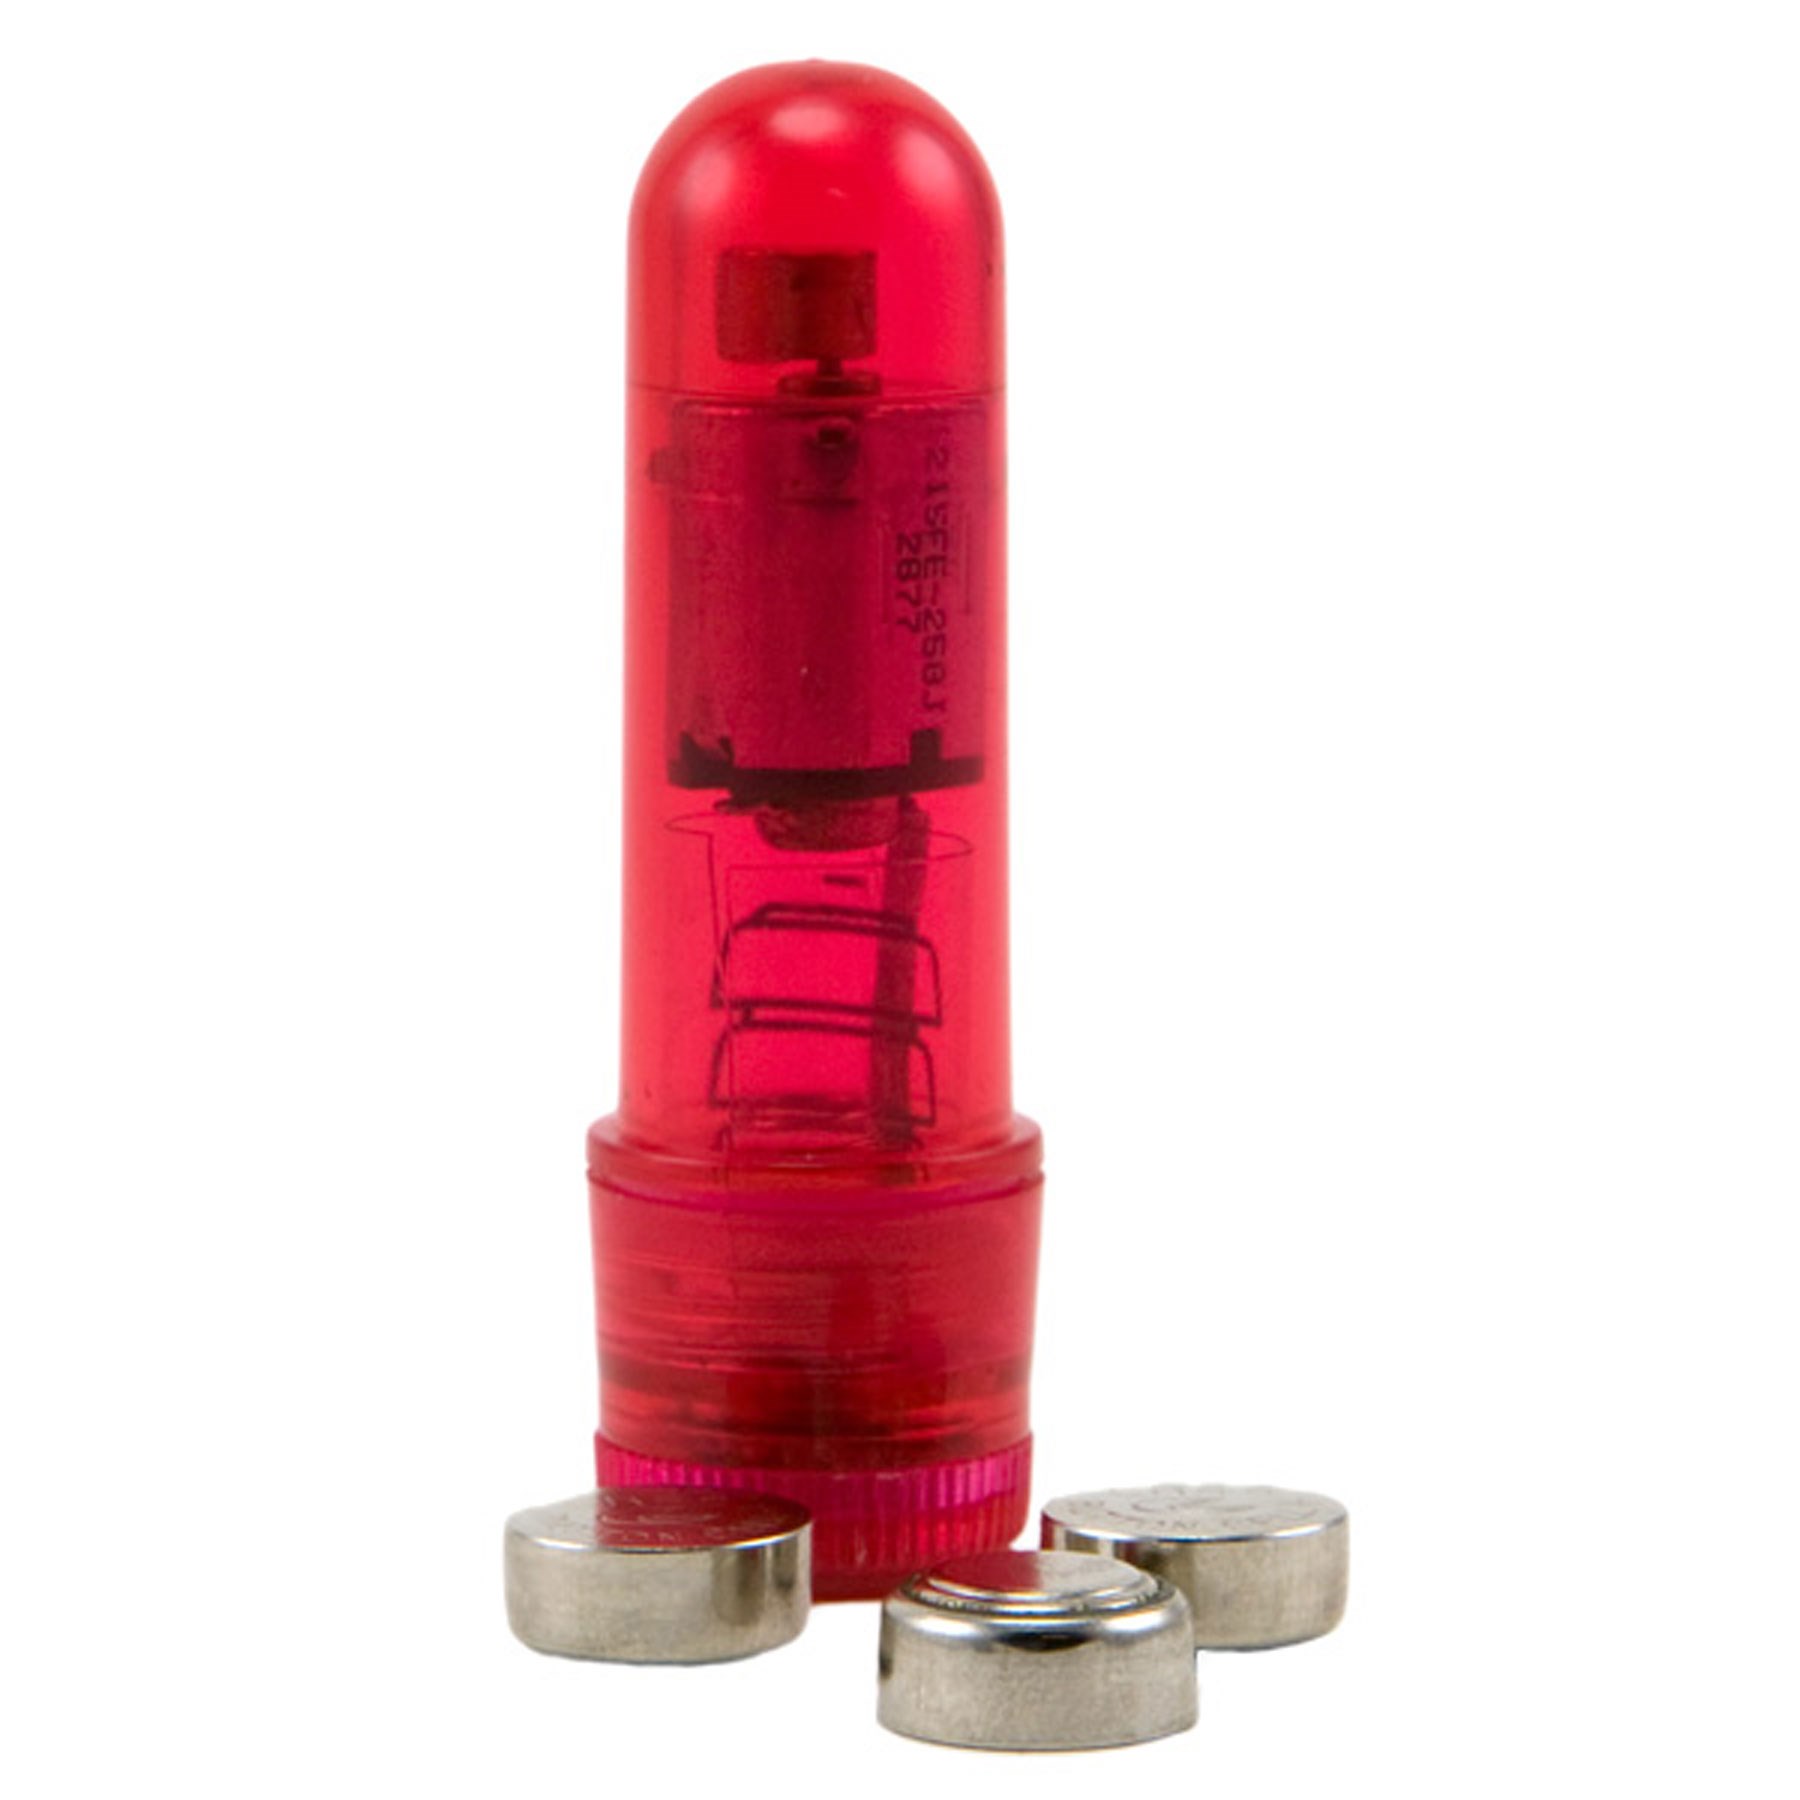 Double Penetrator Penis Ring bullet and batteries